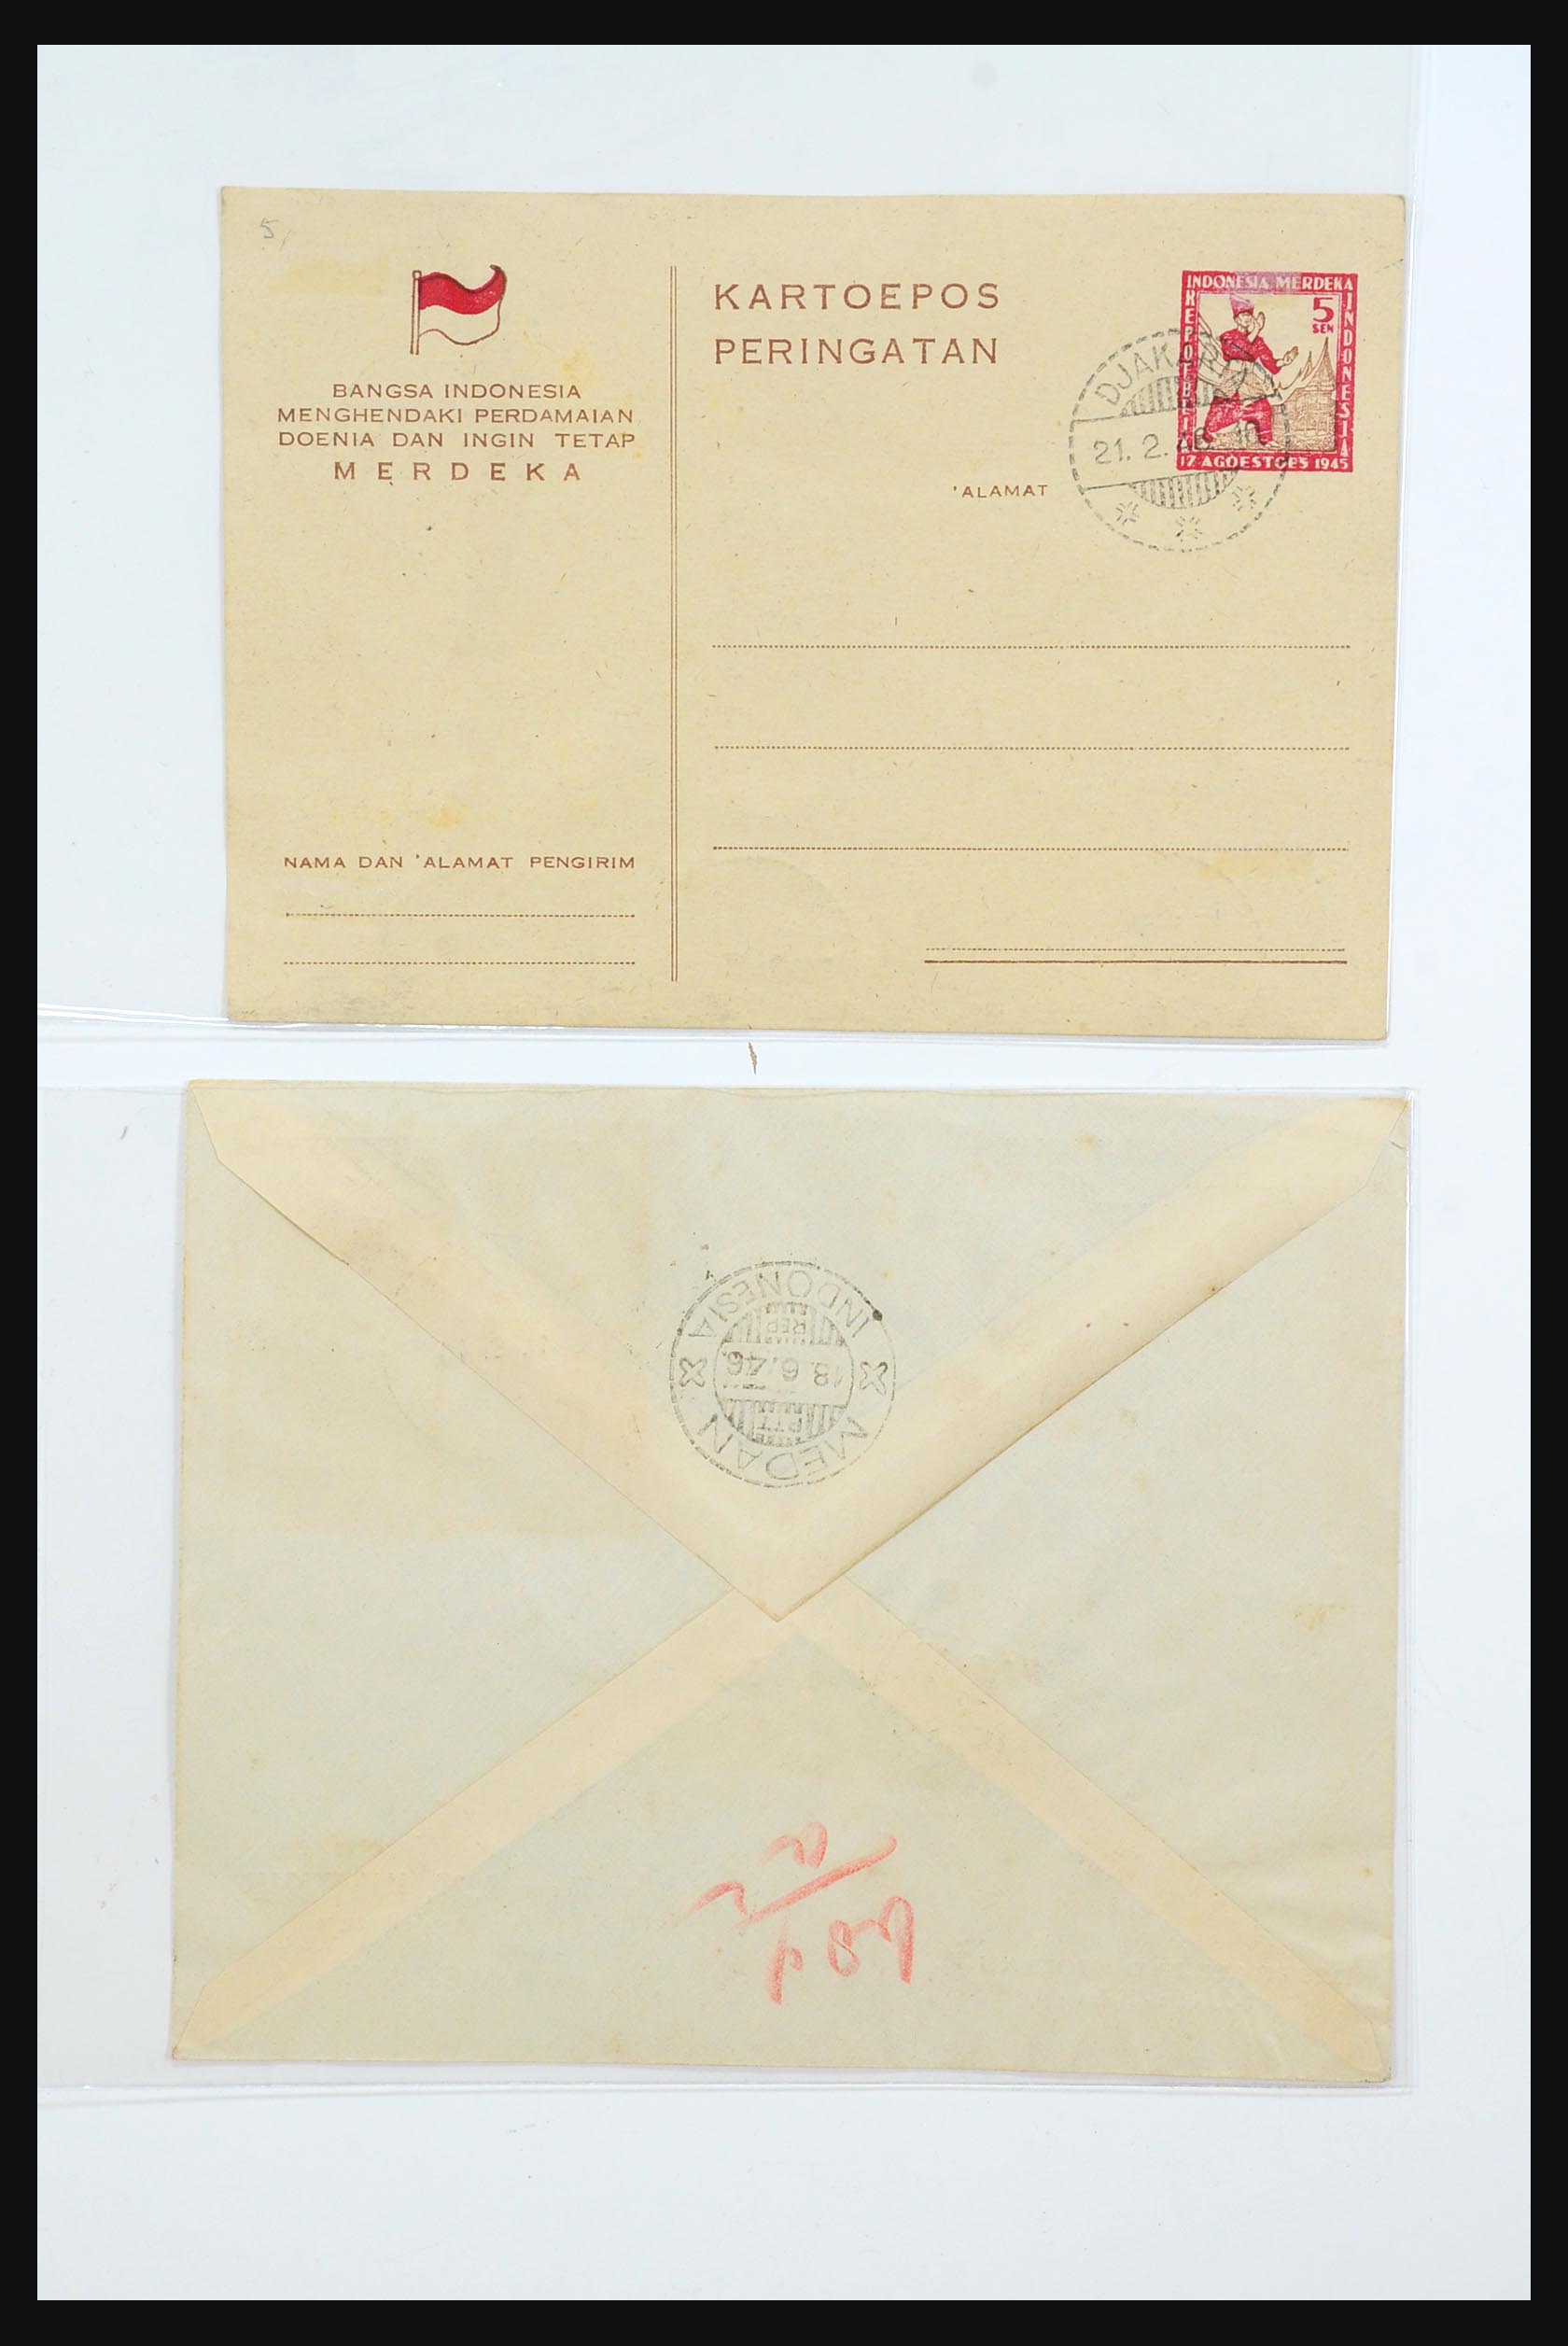 31362 036 - 31362 Netherlands Indies Japanese occupation covers 1942-1945.